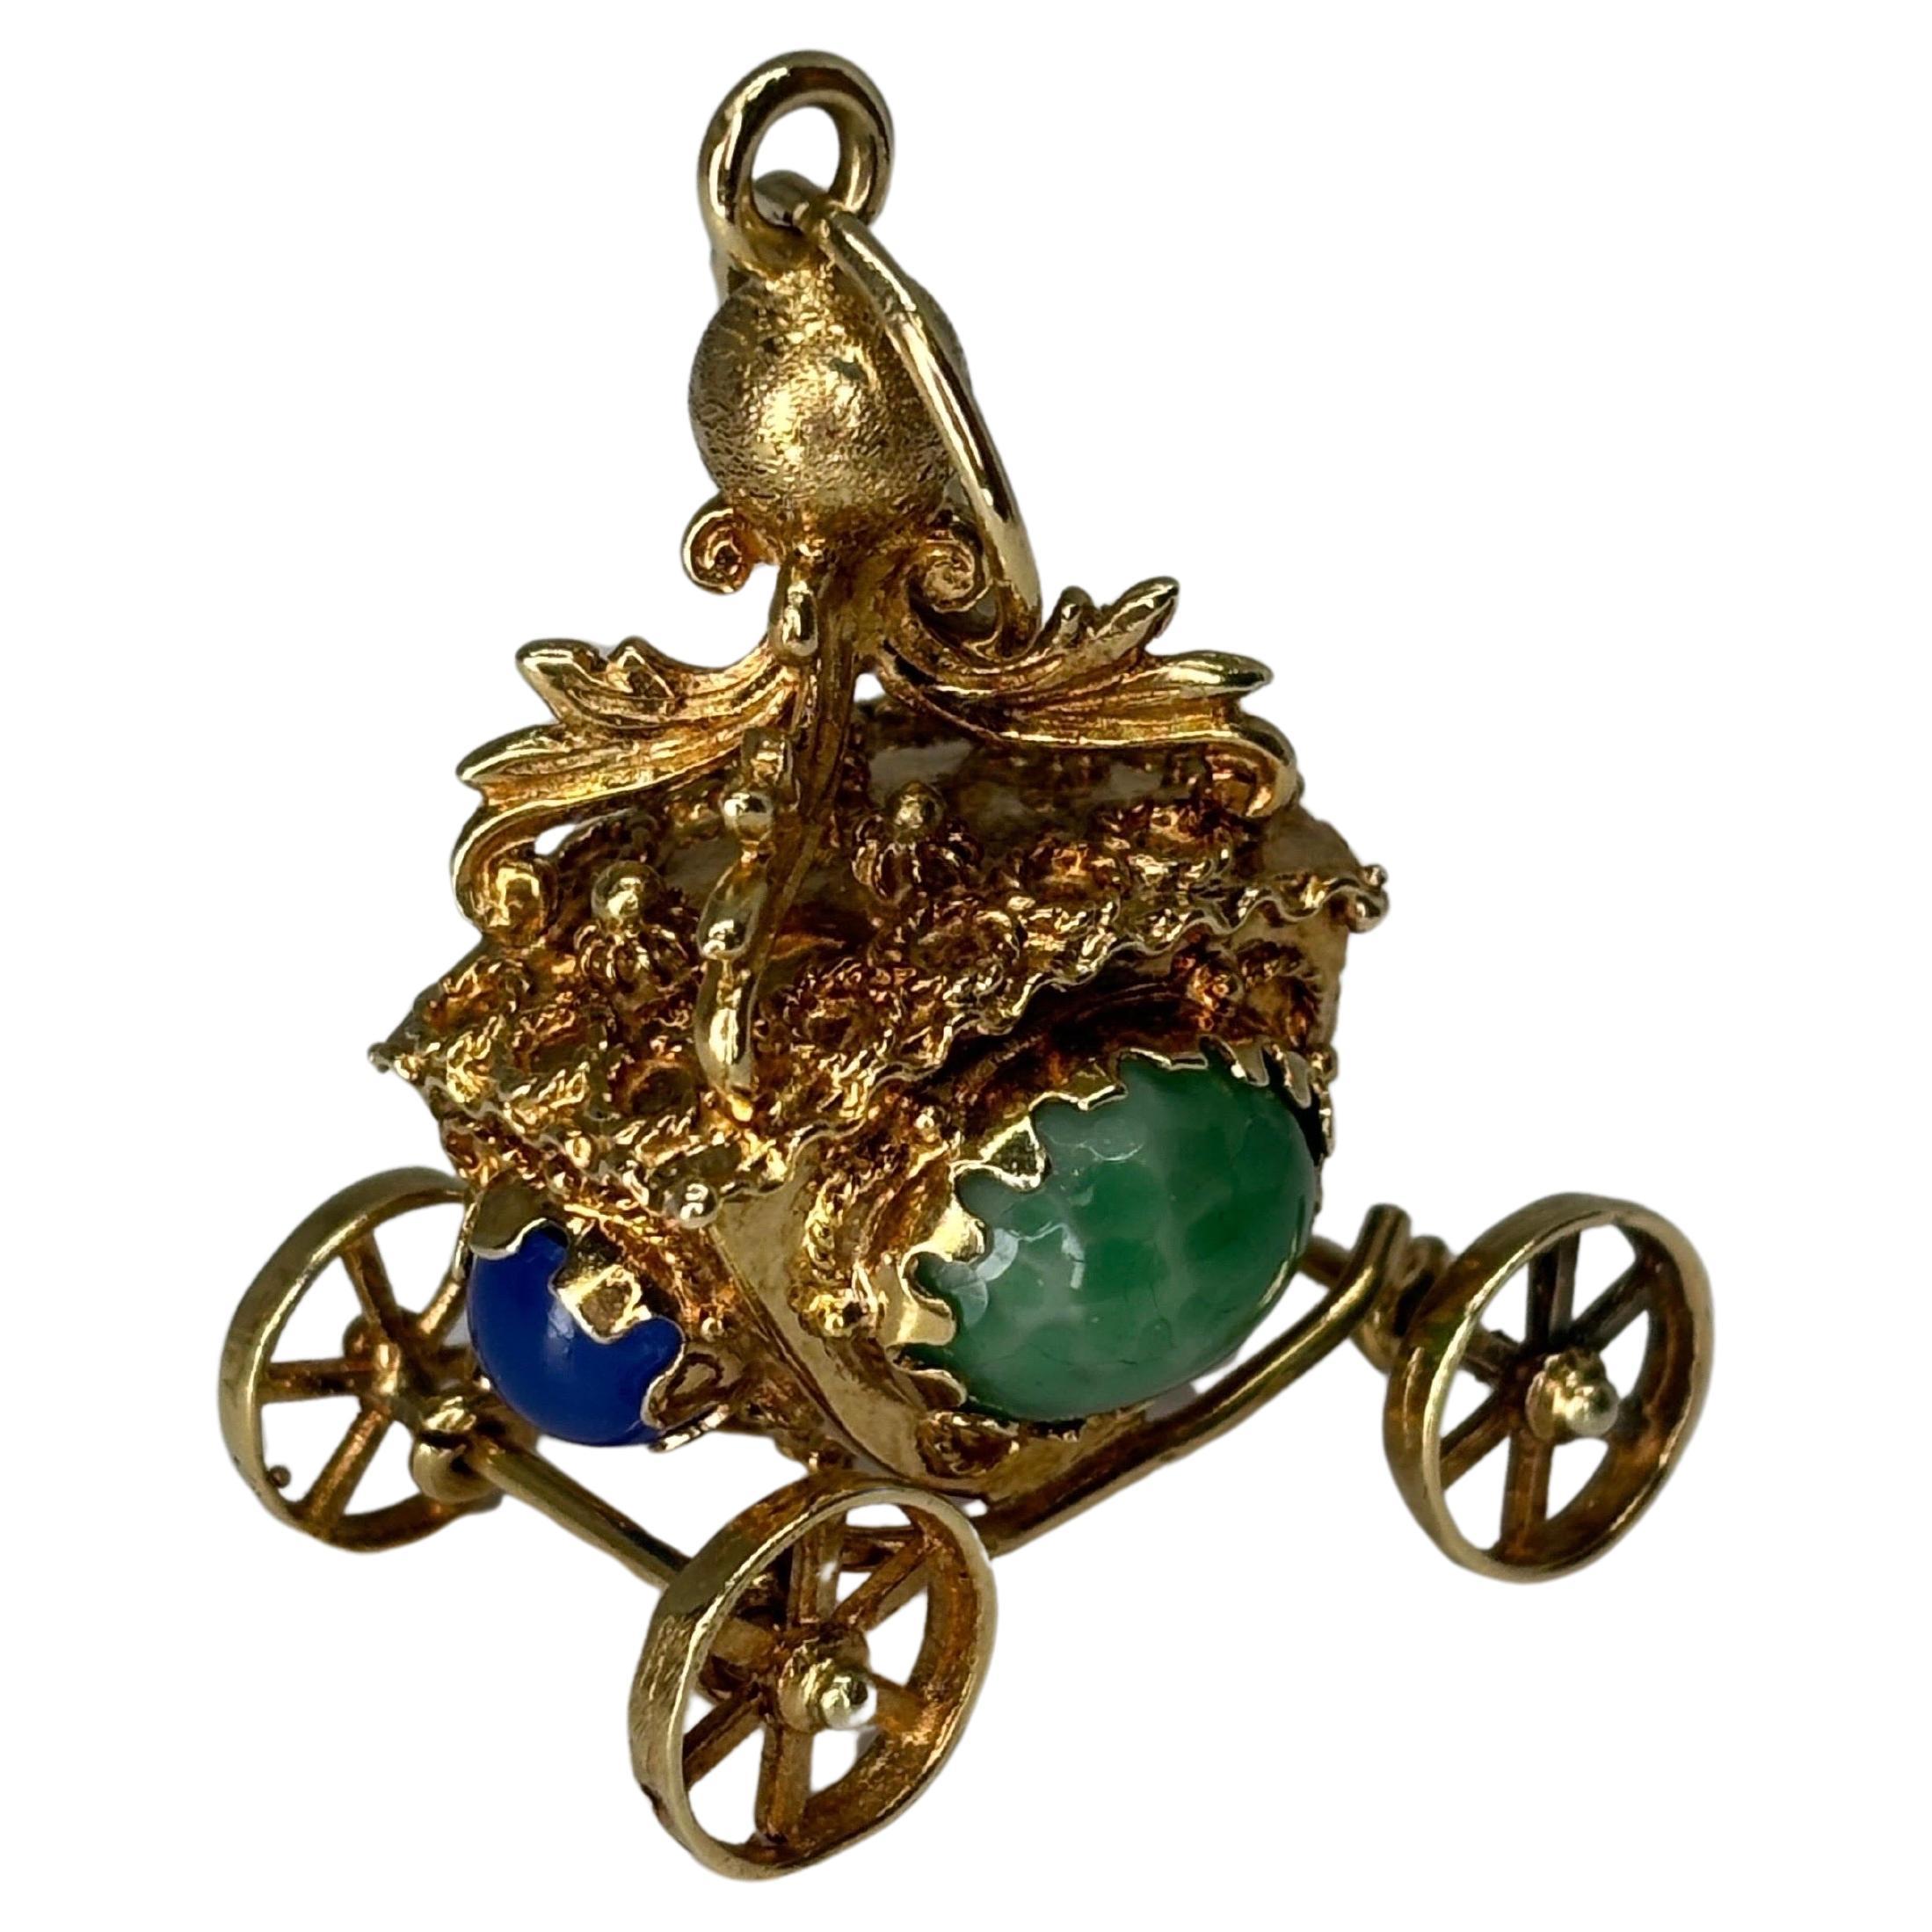 Enchanting 14k yellow gold Etruscan Revival royal carriage coach carriage with movable wheels and accented with blue and green chalcedony cabochon gems.  

This charm embodies the intricate gold work and elaborate designs characteristic of Etruscan